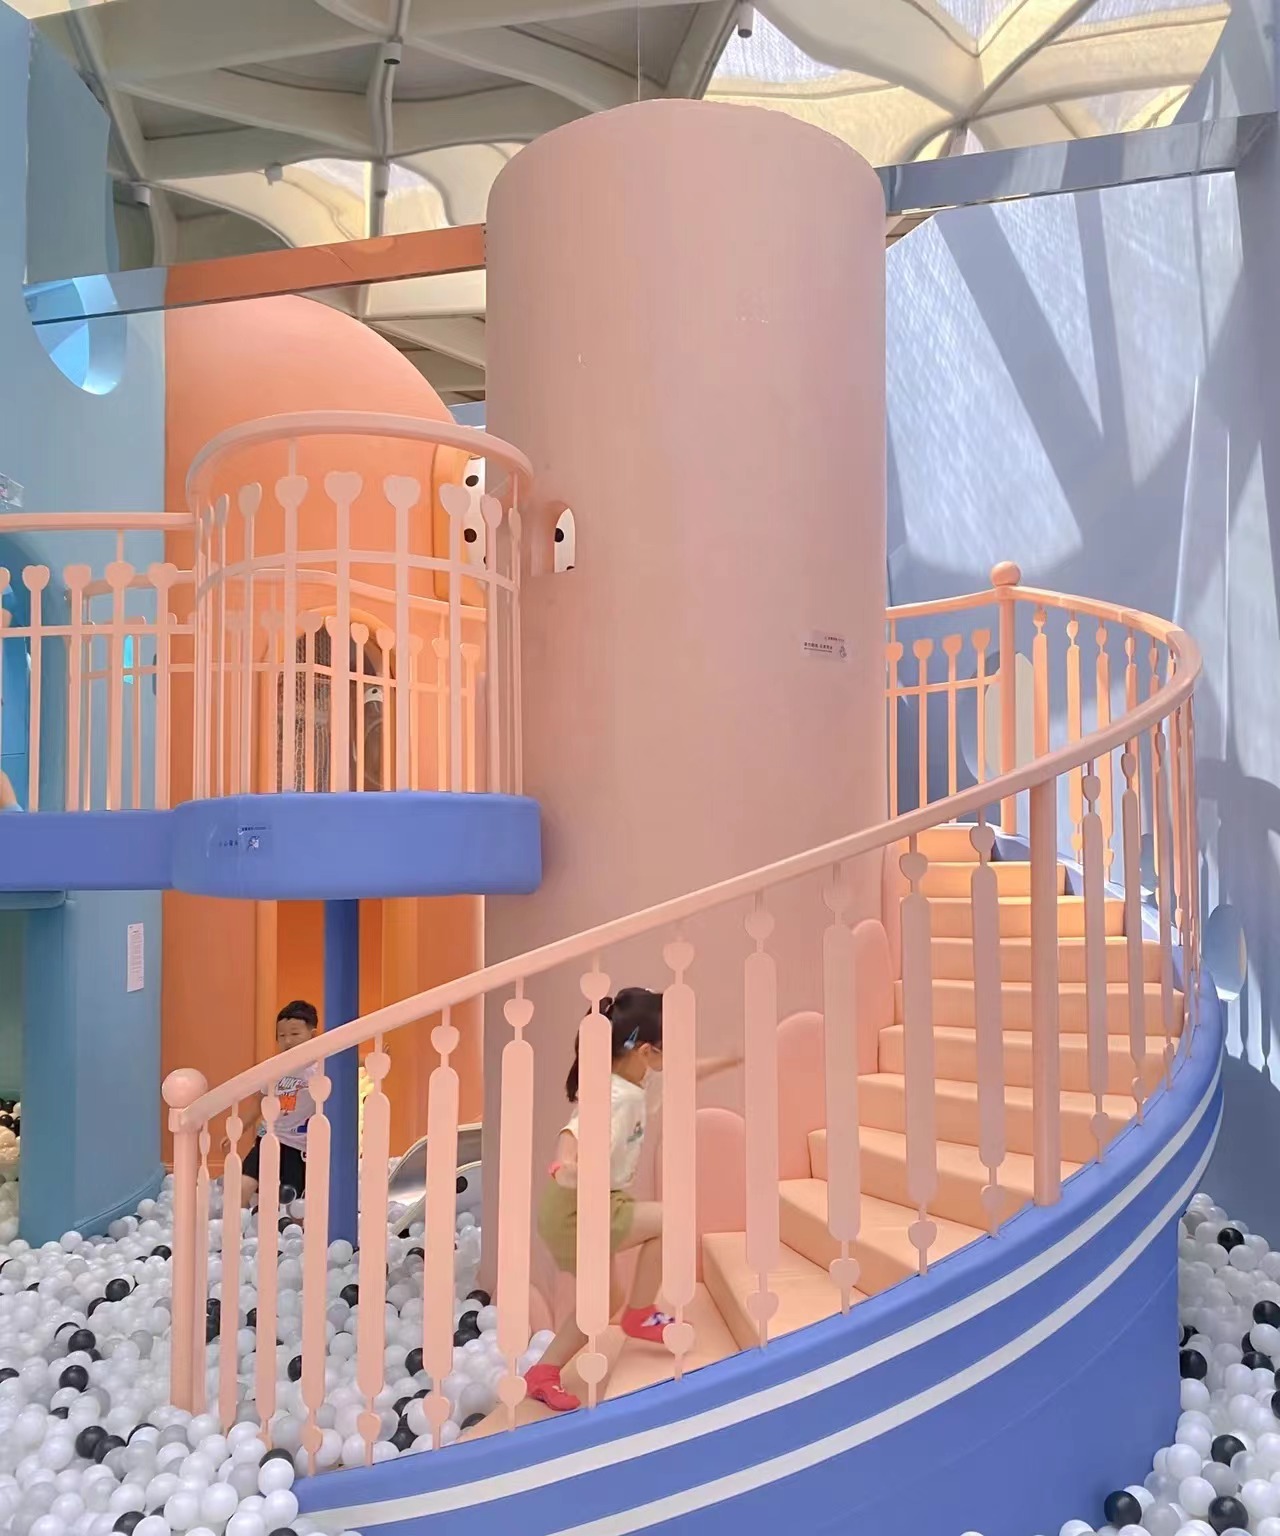 So how much does it cost to open a 300 square meter indoor playground?